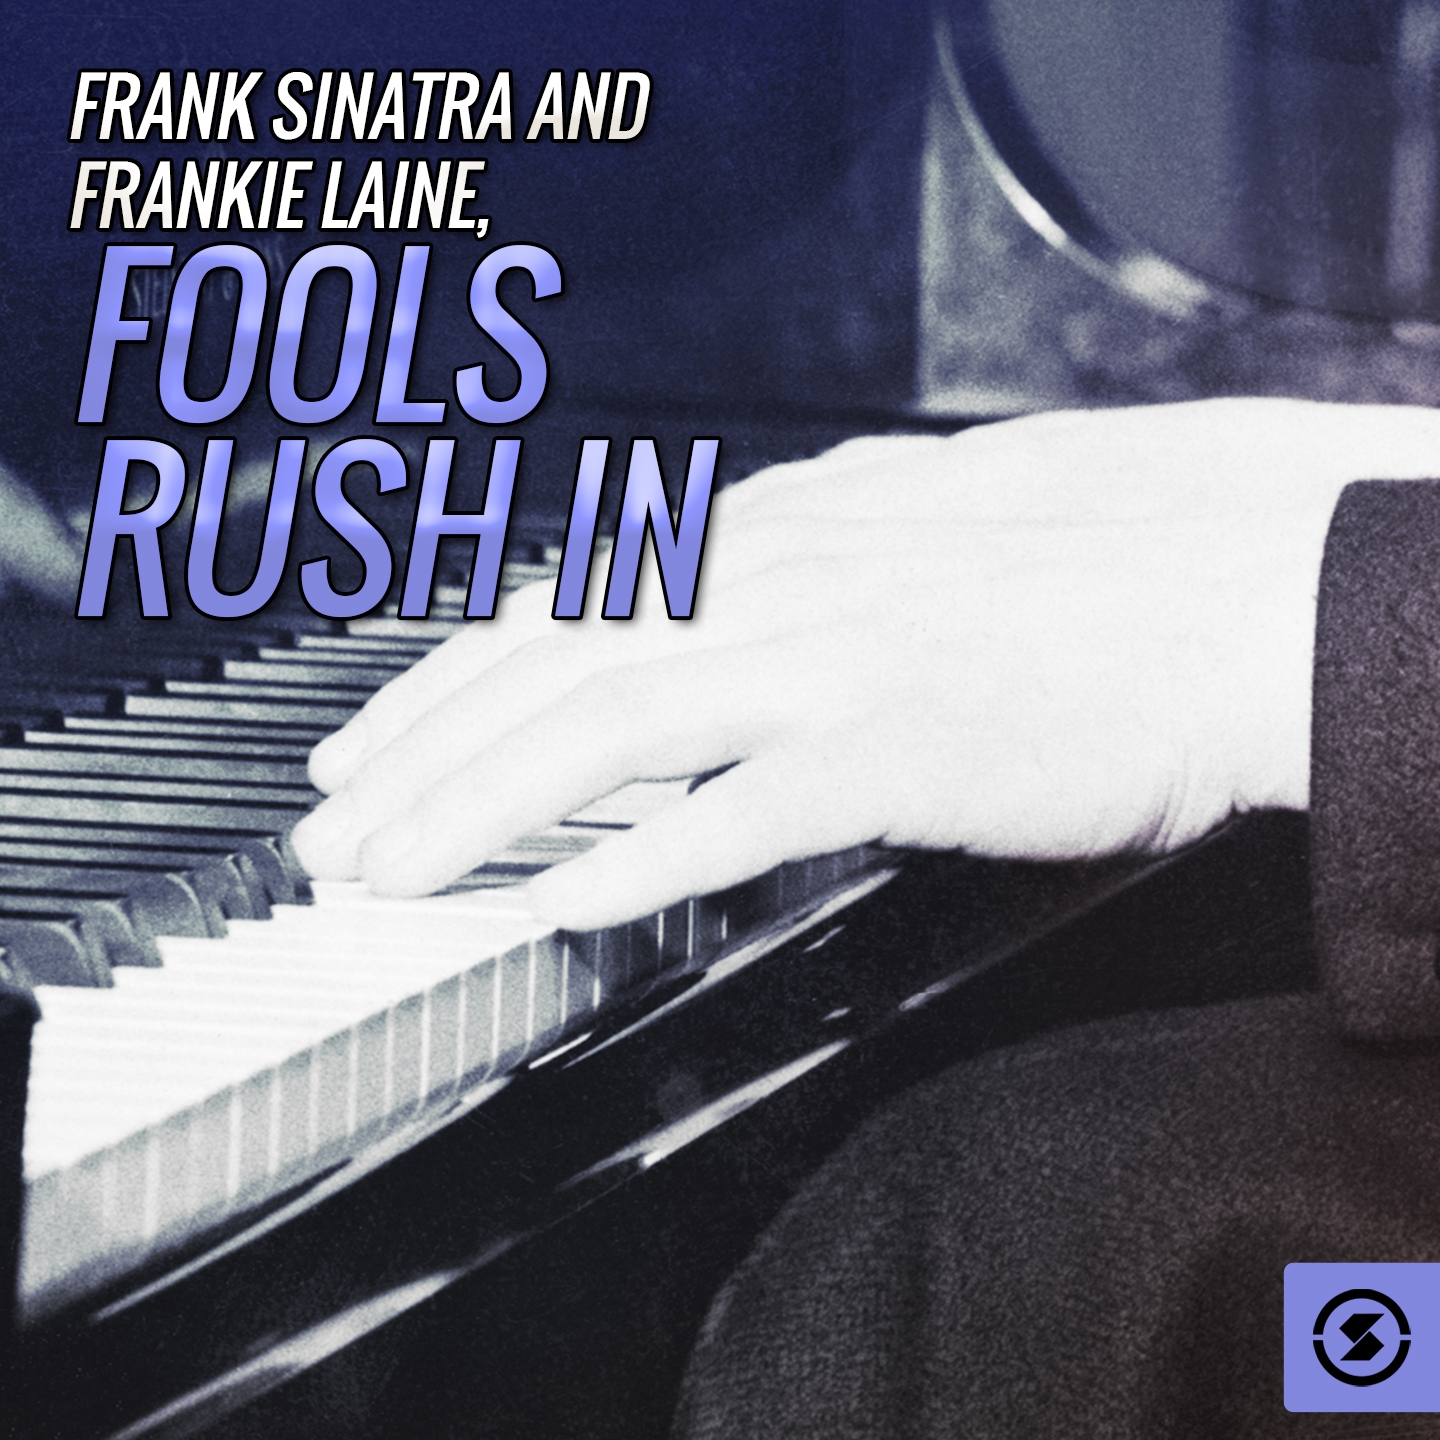 Frank Sinatra and Frankie Laine, Fools Rush In